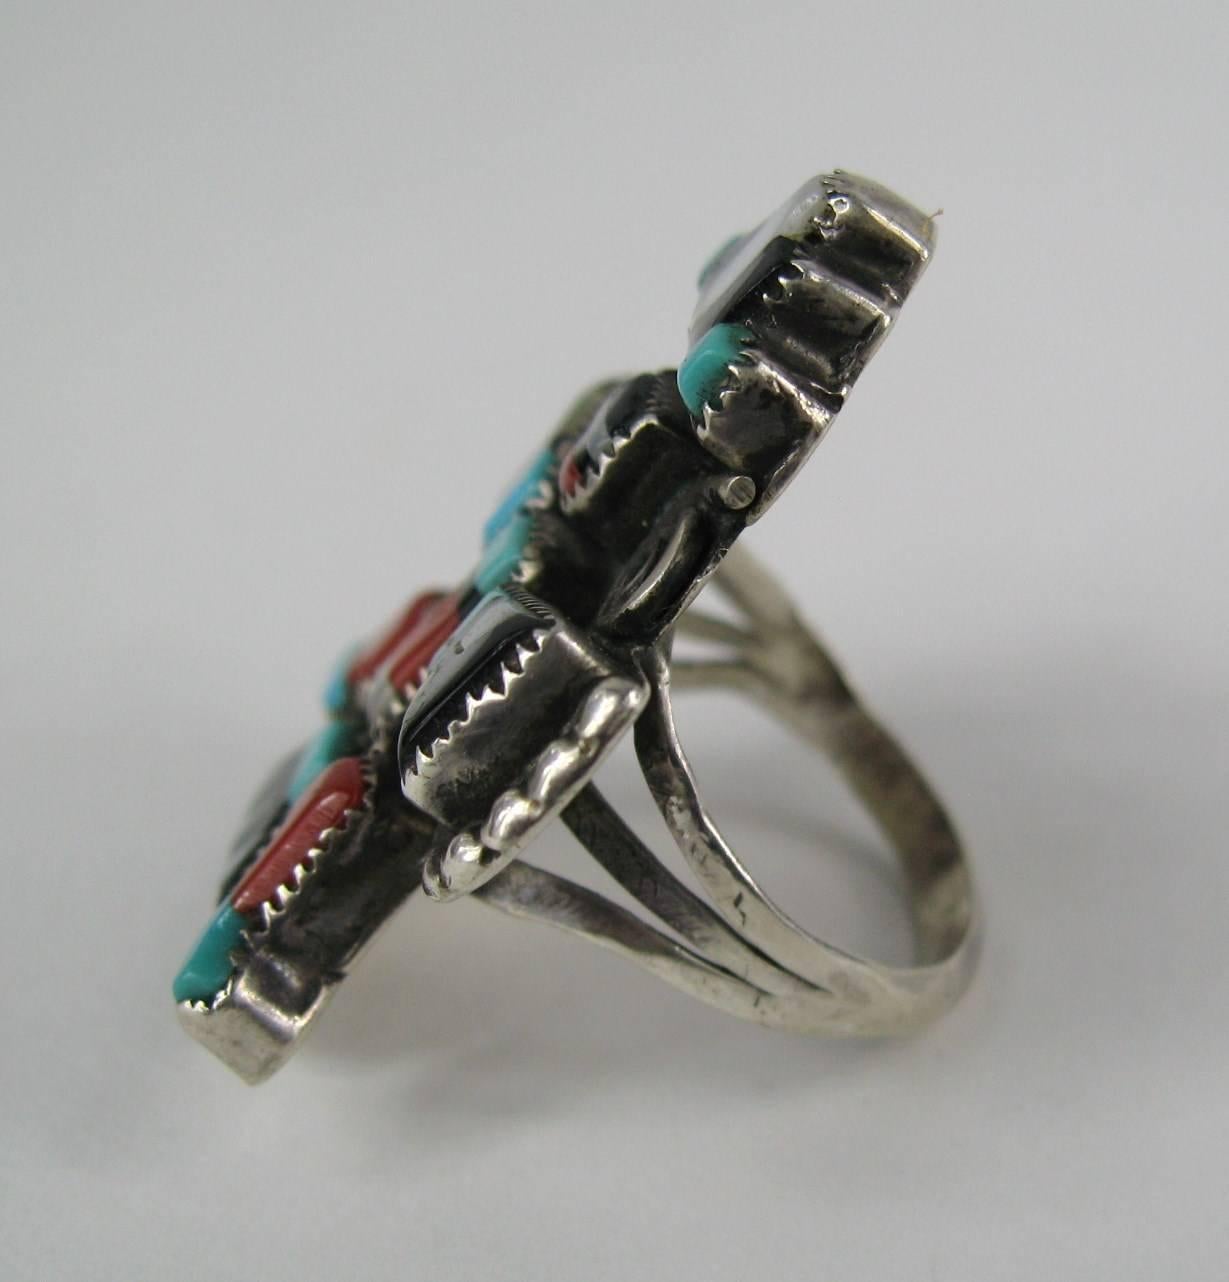 The ring is made up of Turquoise, Onyx, Mother of Pearl And Coral. Ring is a size 7.5- Measuring 1.47 in x 1.15 in. Hallmarked inside G.B Natachu. This is out of a massive collection of Hopi, Zuni, Navajo, Southwestern, sterling silver, costume